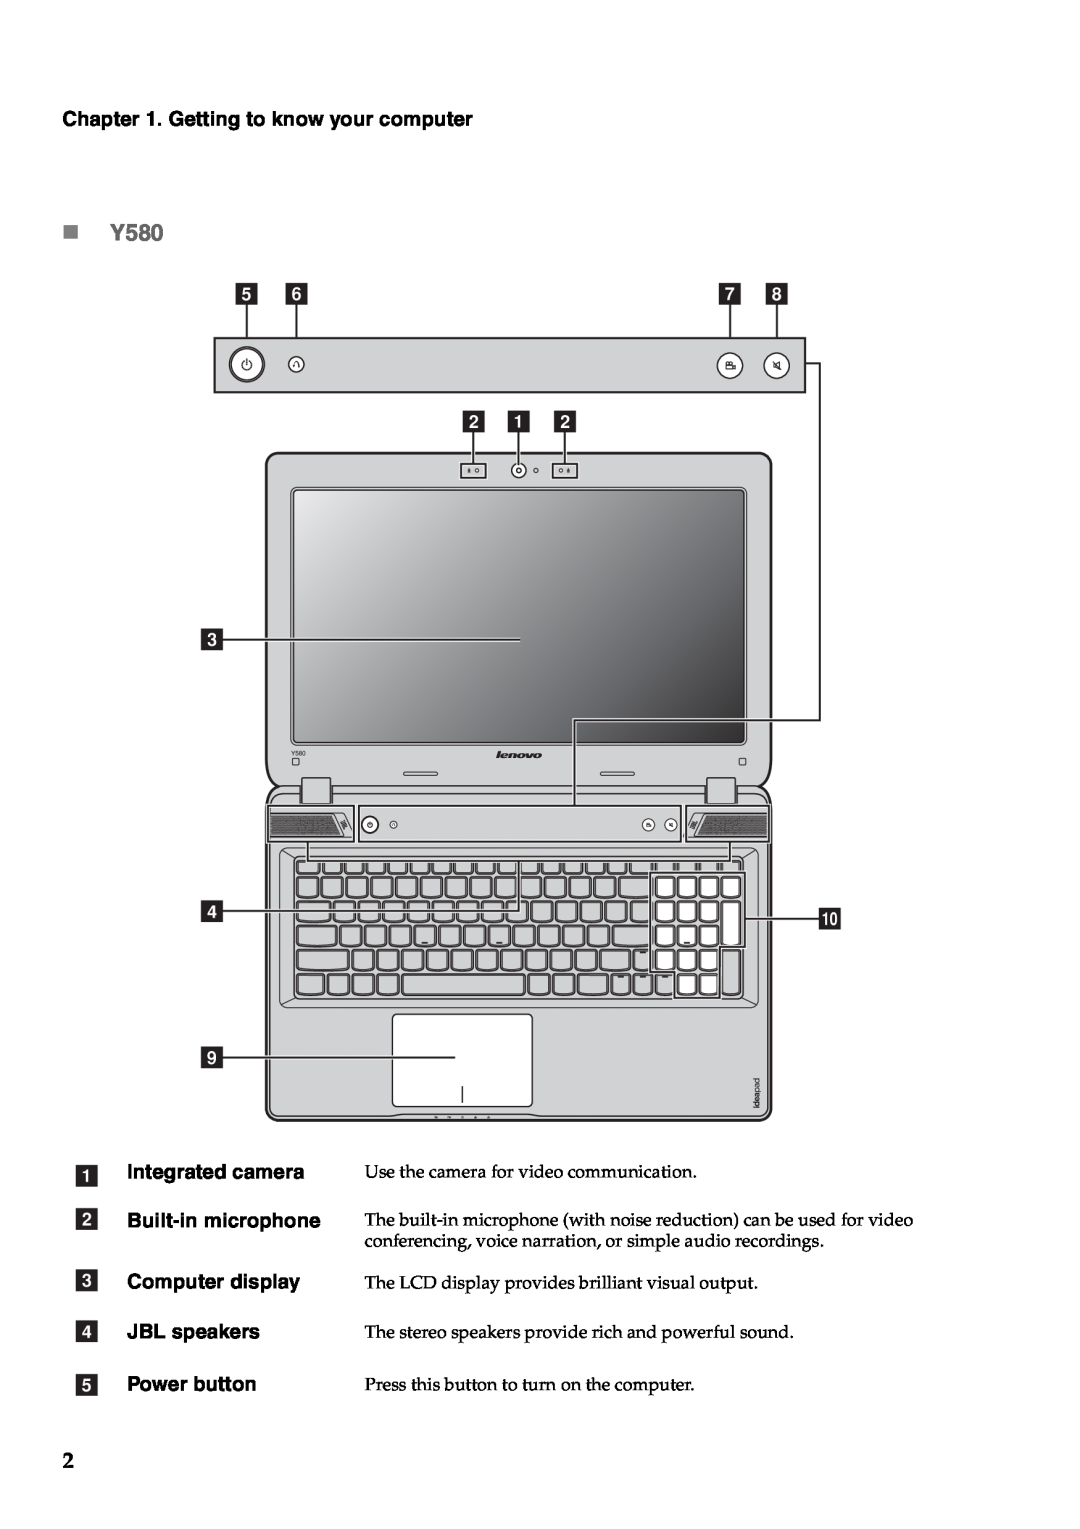 Lenovo Y480 manual „ Y580, Getting to know your computer, b a b c dj, Computer display, JBL speakers, Power button 